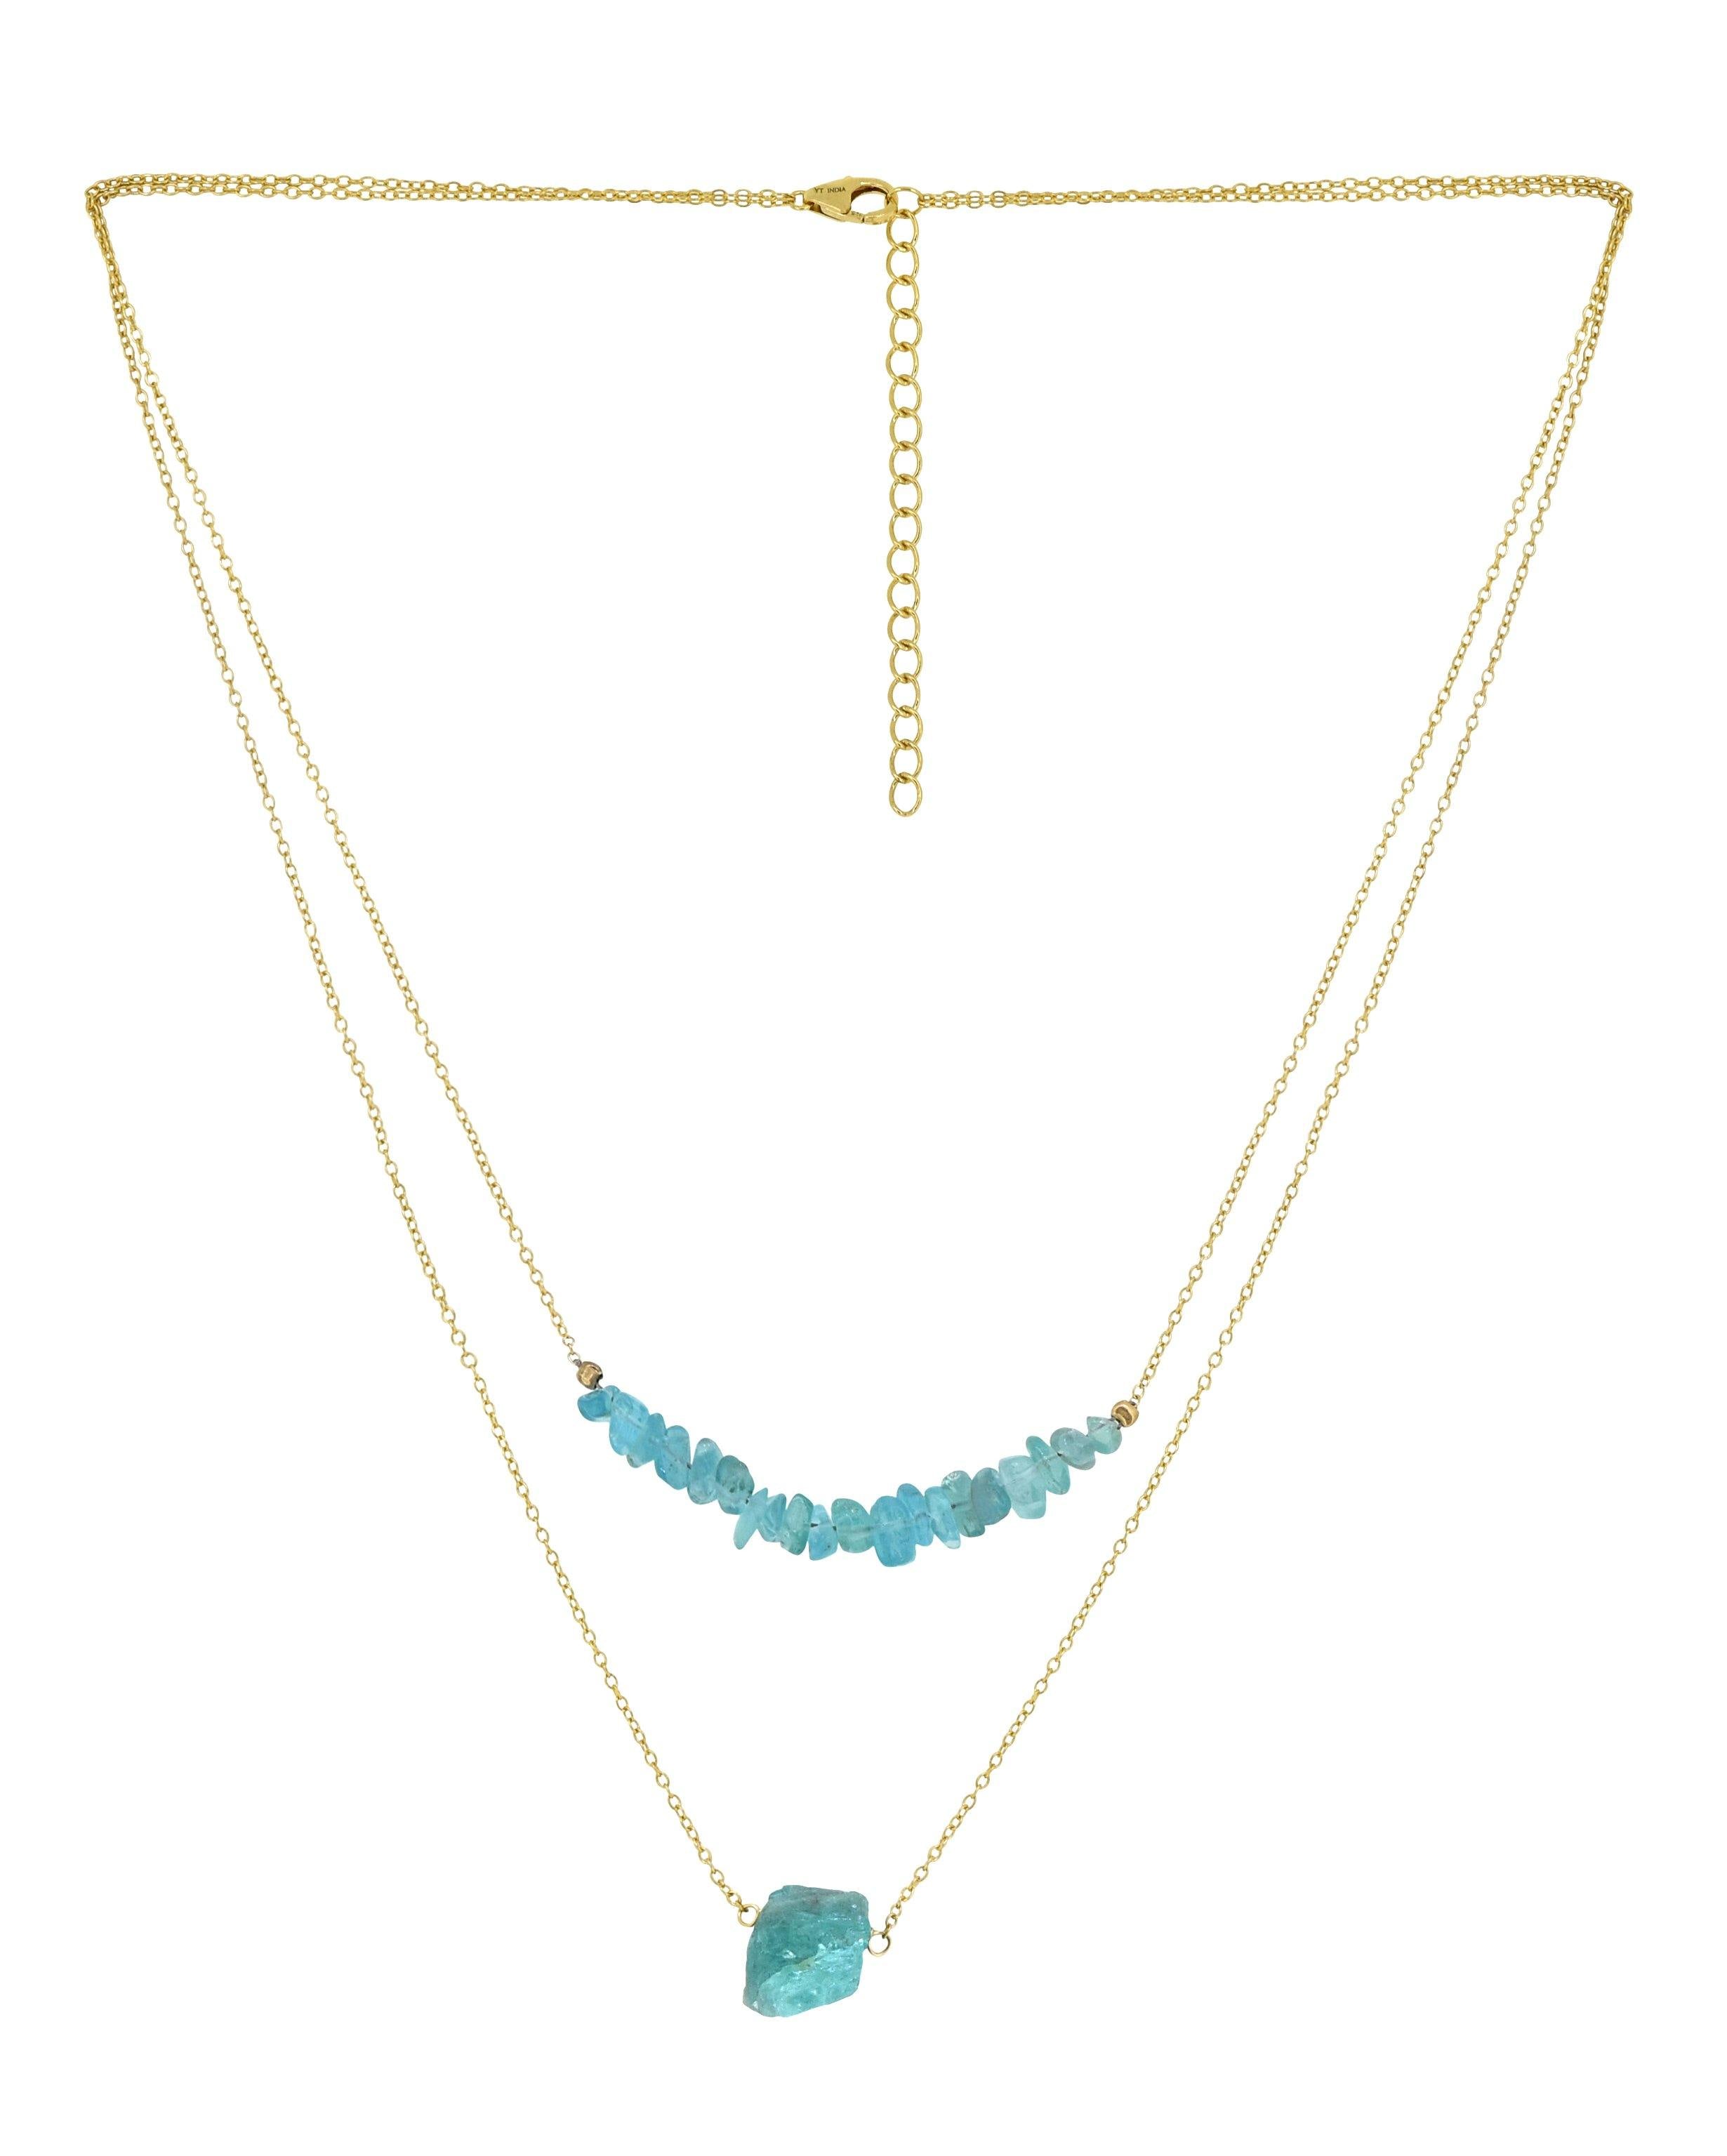 Apatite Solid 925 Sterling Silver Gold Plated Double Layer Chain Pendant Necklace Jewelry - YoTreasure